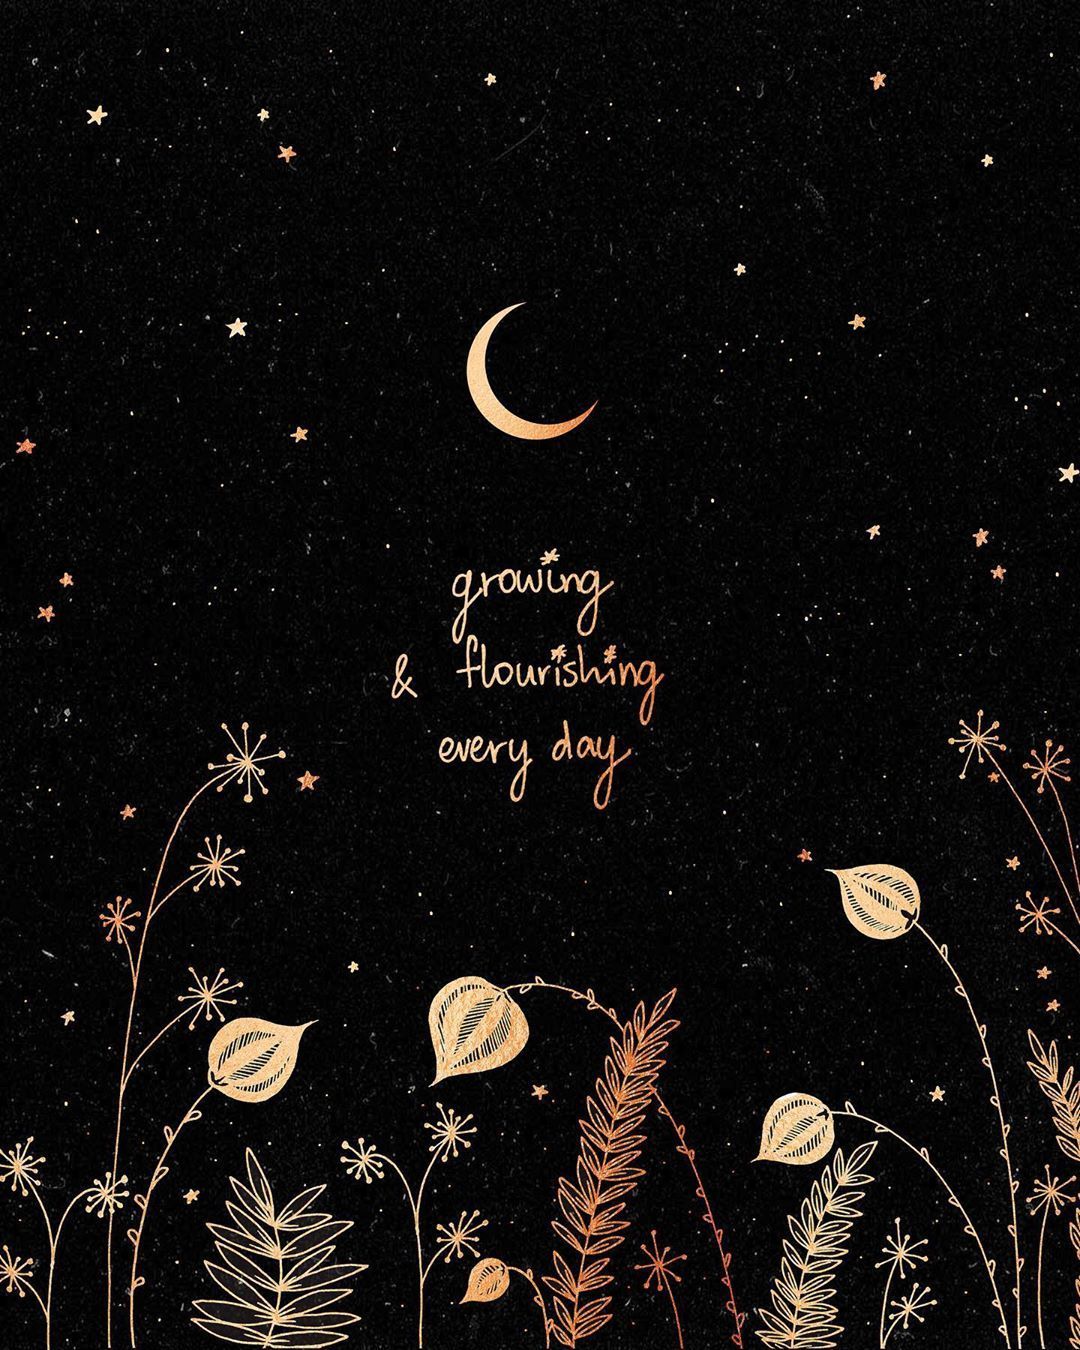 dreamy_moons on Instagram: “A gentle reminder that you are constantly growing, and that mistakes are. Wallpaper tumblr lockscreen, Wallpaper quotes, Shadow work